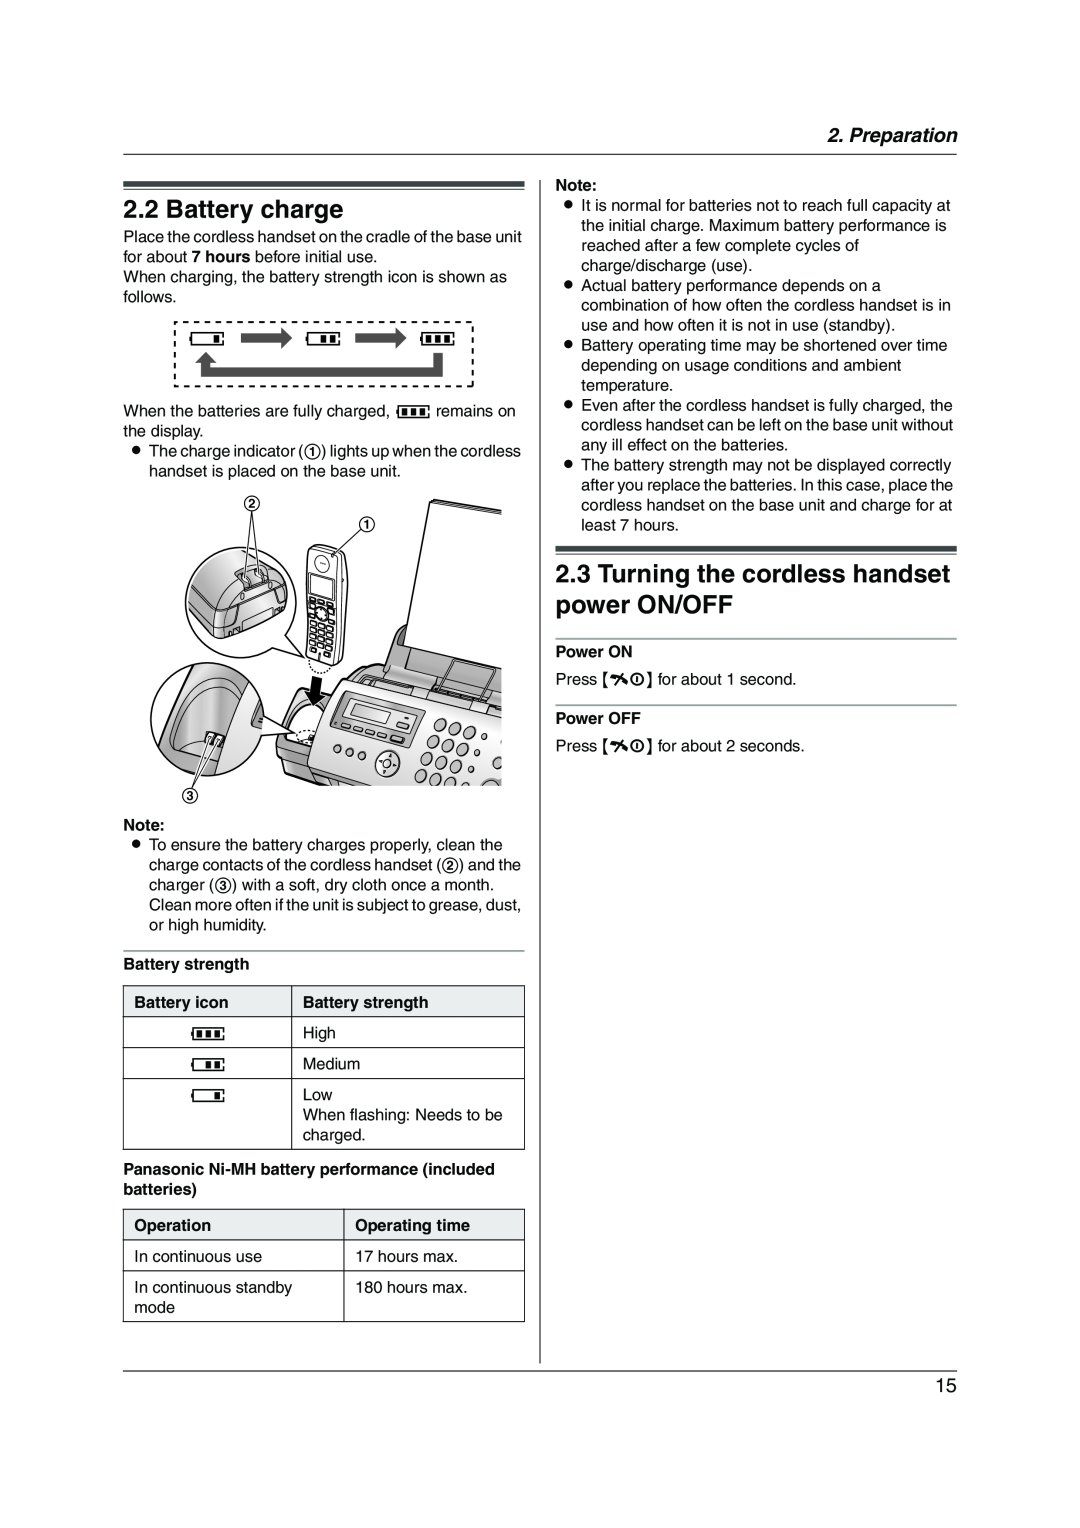 Panasonic KX-FC228HK operating instructions Battery charge, Turning the cordless handset power ON/OFF, Preparation 